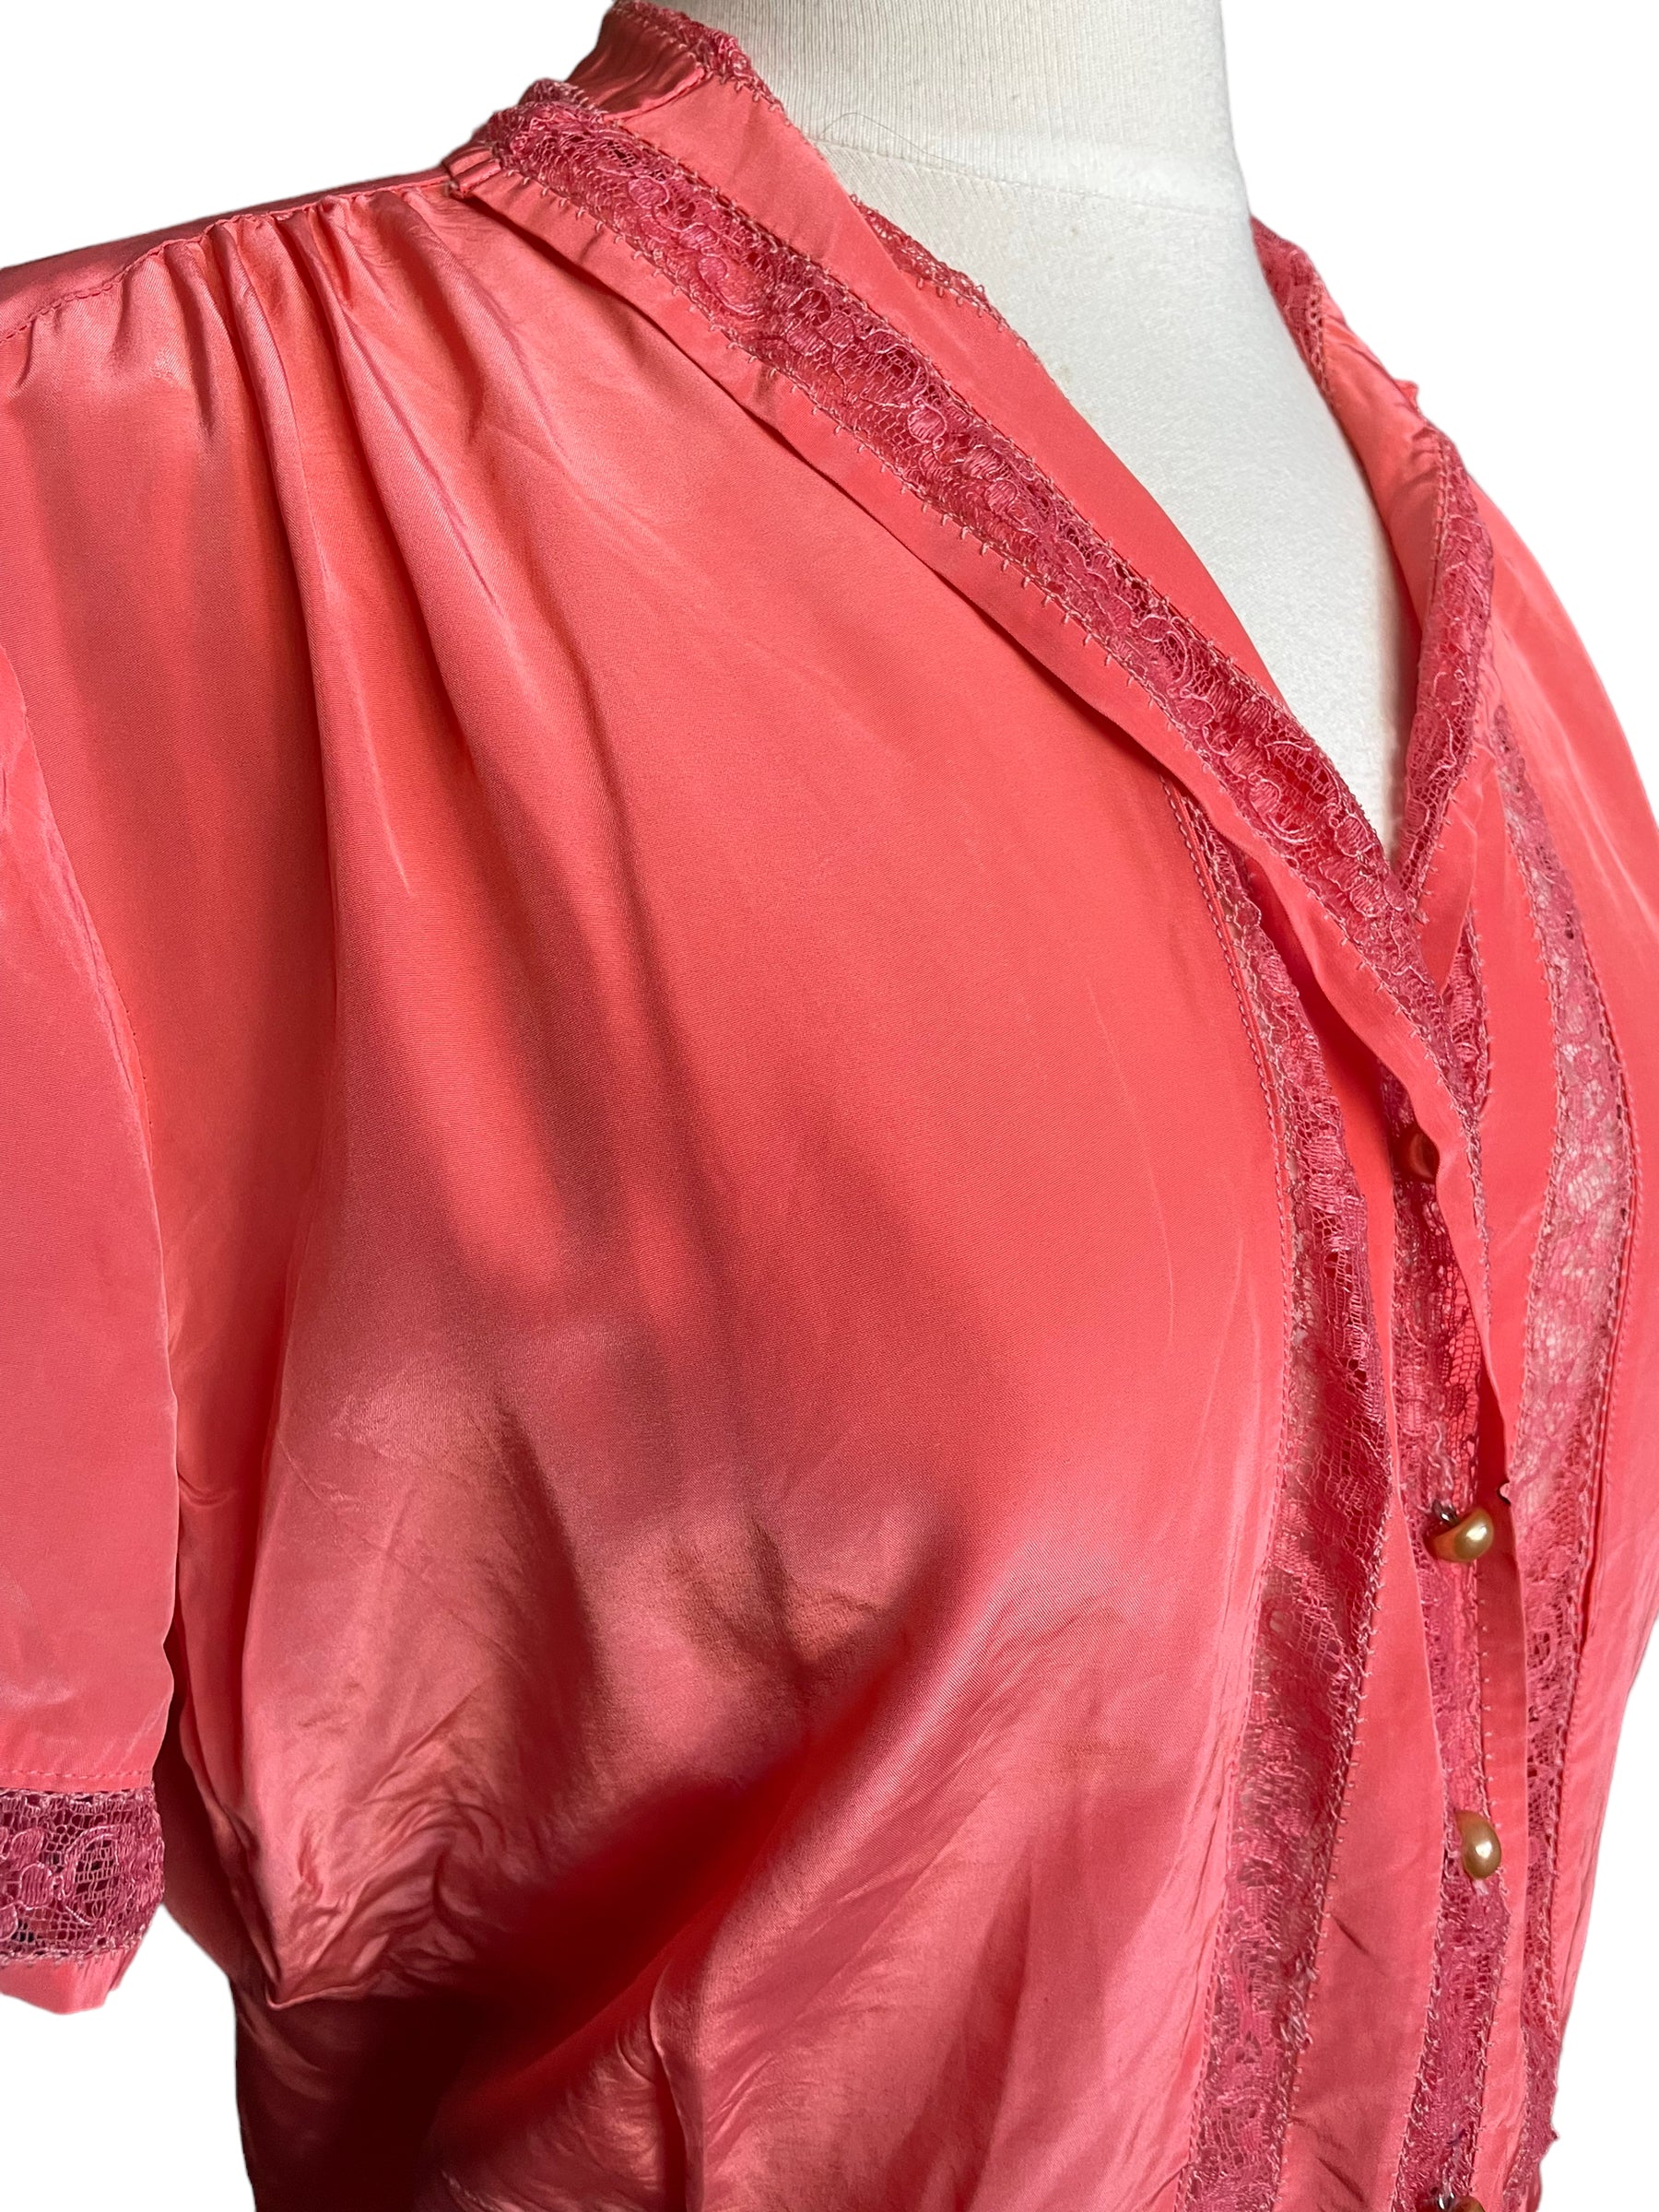 Close up right side front view of Vintage 1940s Satin Coral Blouse | Seattle True Vintage | Barn Owl Ladies Vintage